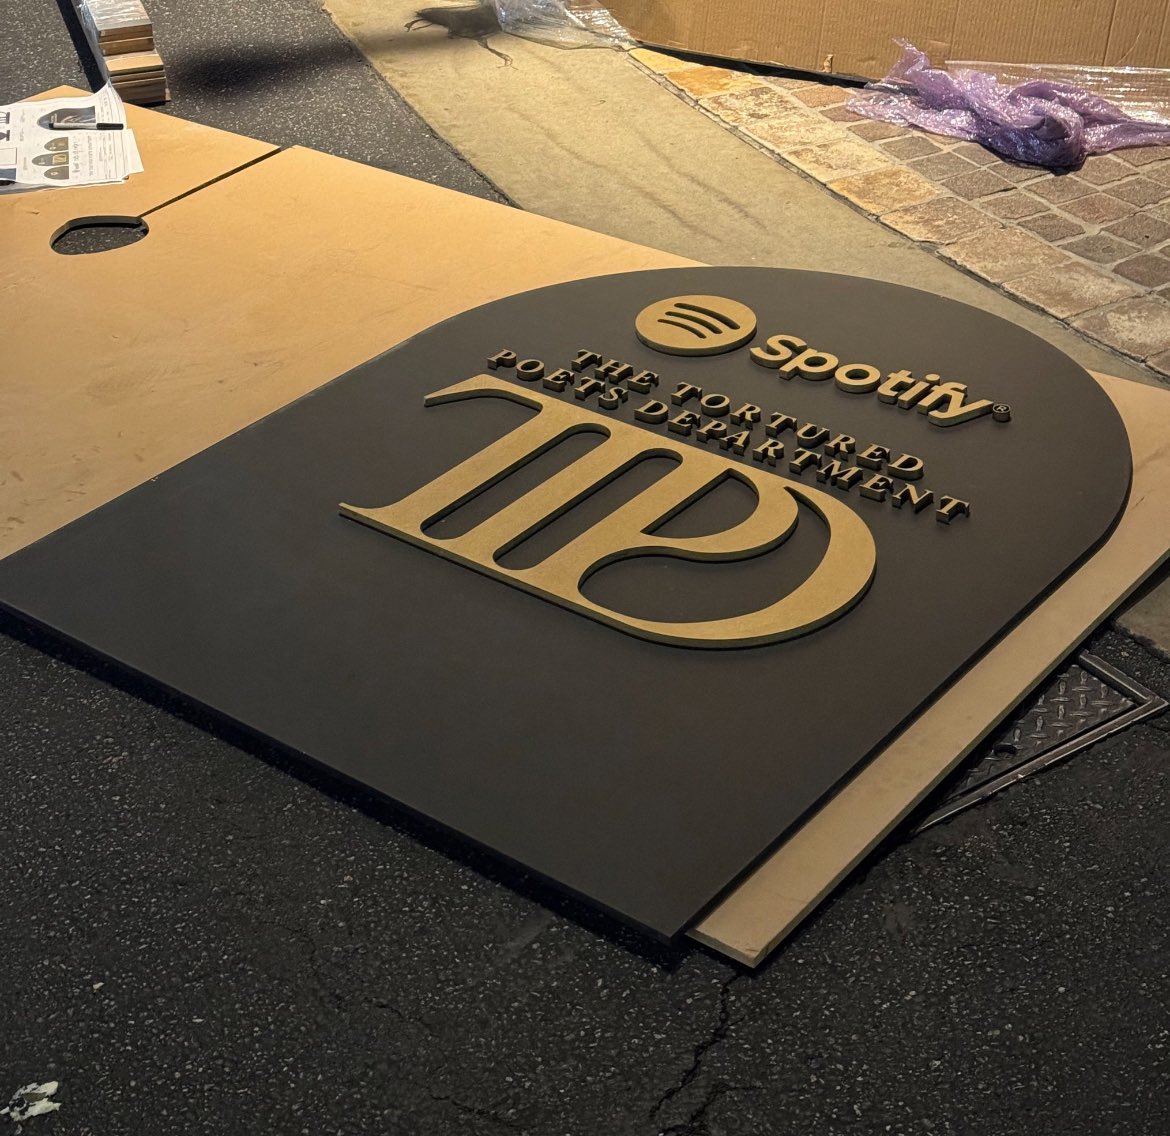 A first look at the TTPD Spotify Sign! #TSTTPD #TTPD